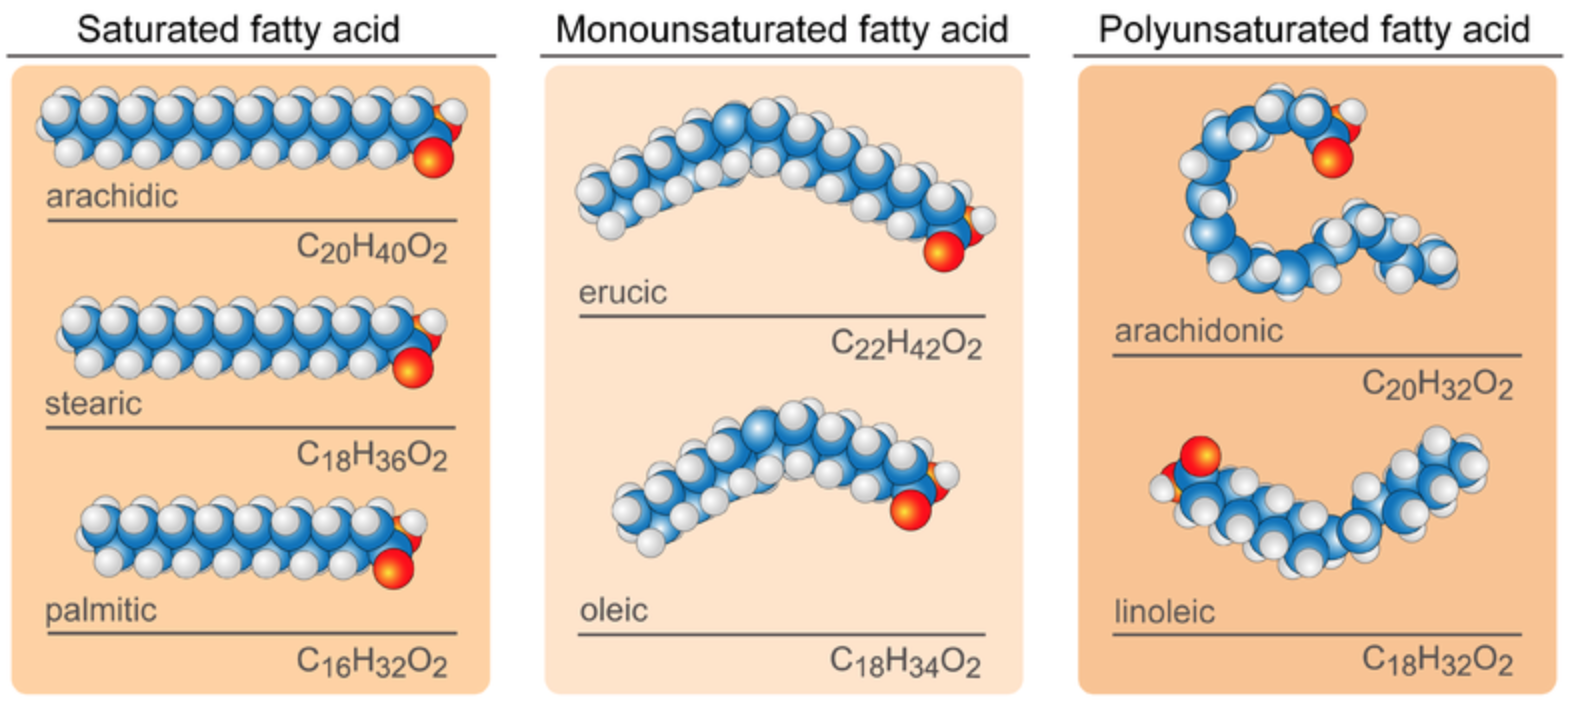 saturated and unsaturated fatty acids structures. 